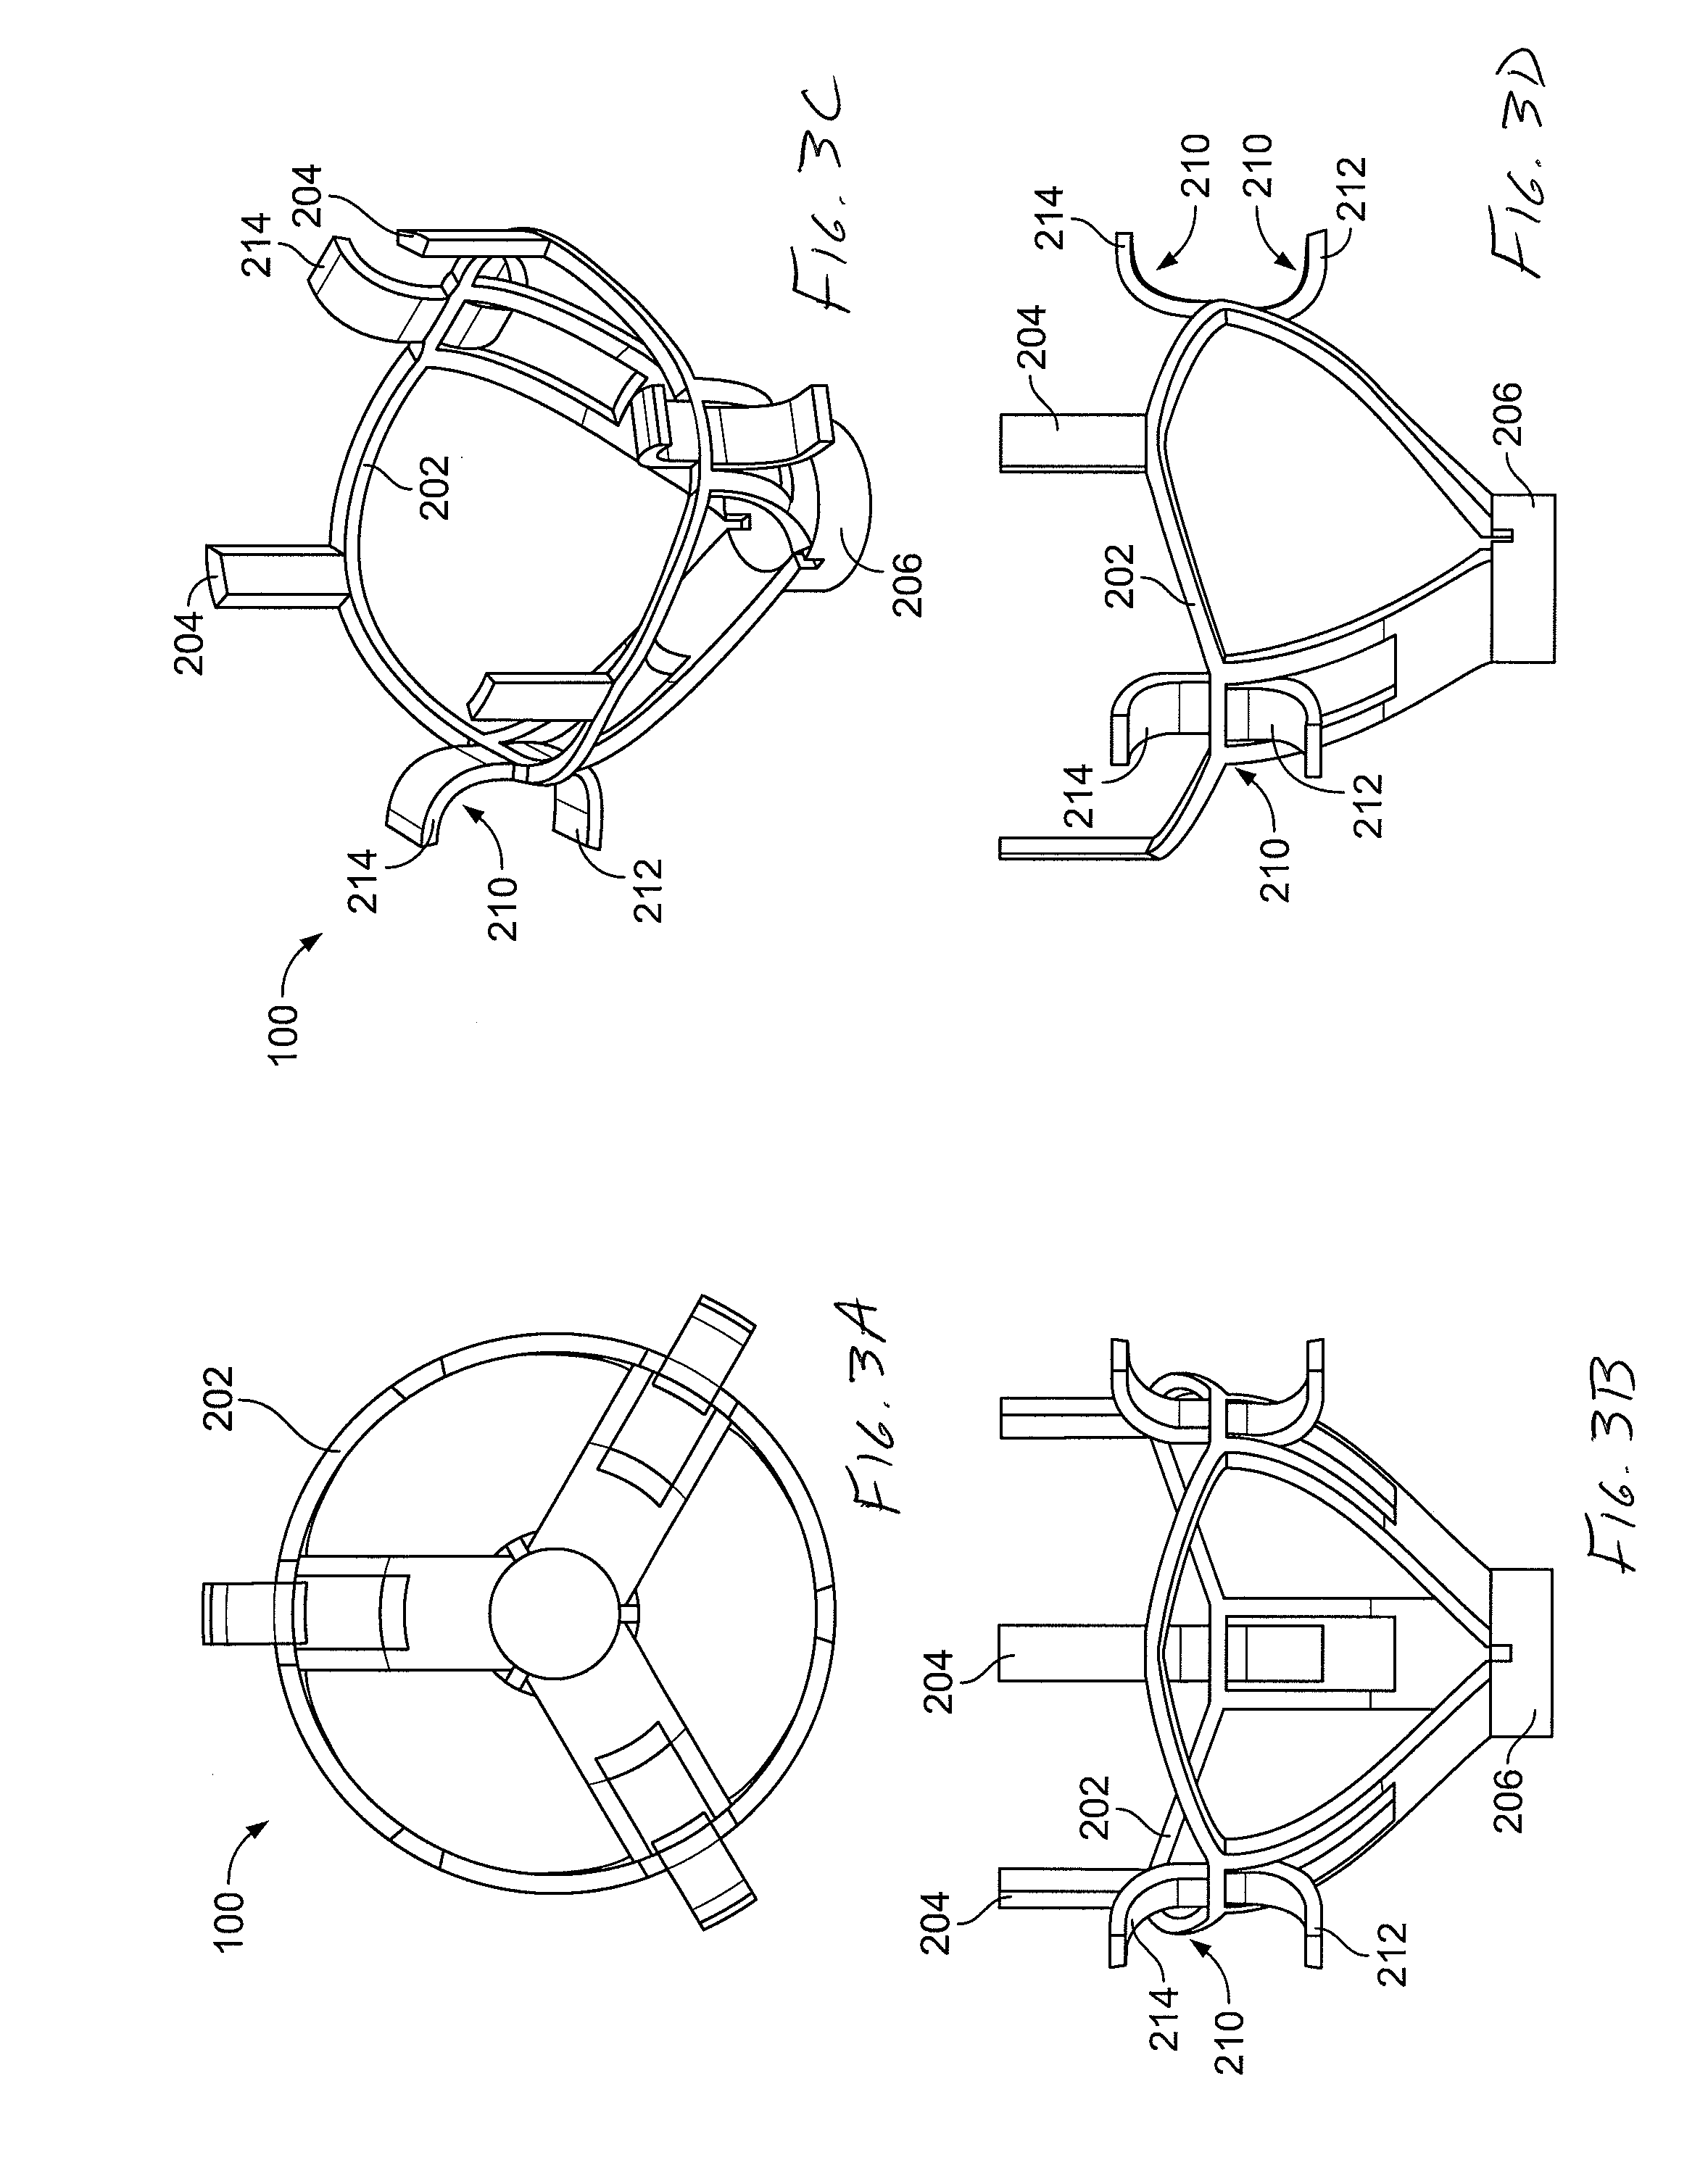 One Piece Prosthetic Valve Support Structure and Related Assemblies